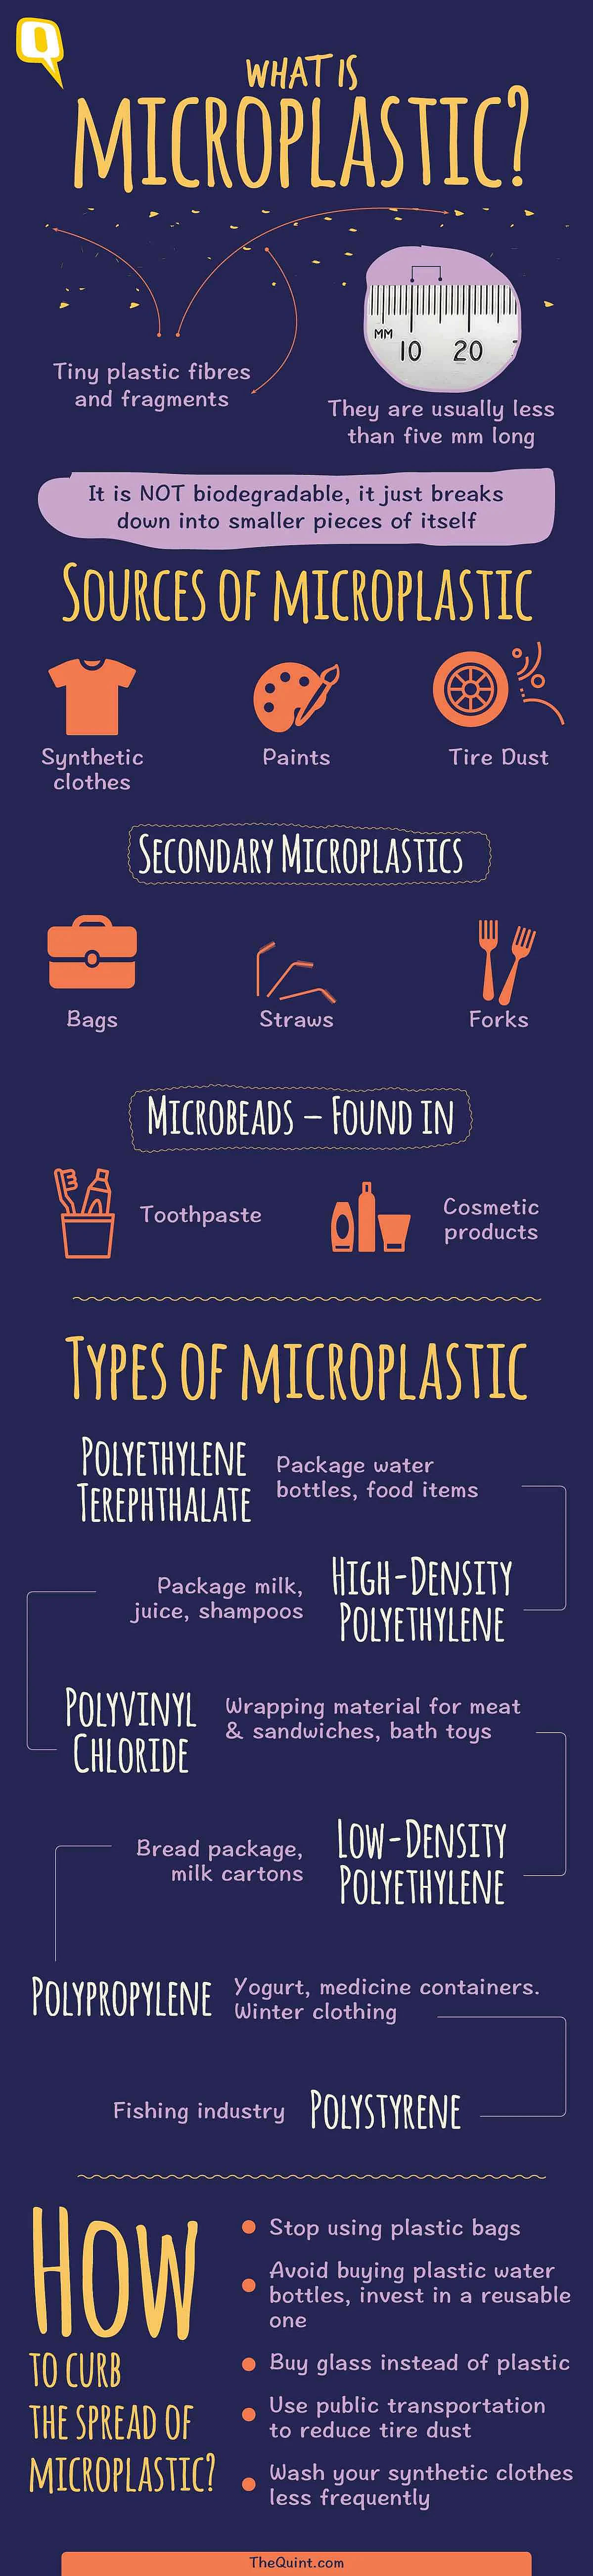 80 percent of the 22 study participants were found to have traces of microplastics in their blood samples.